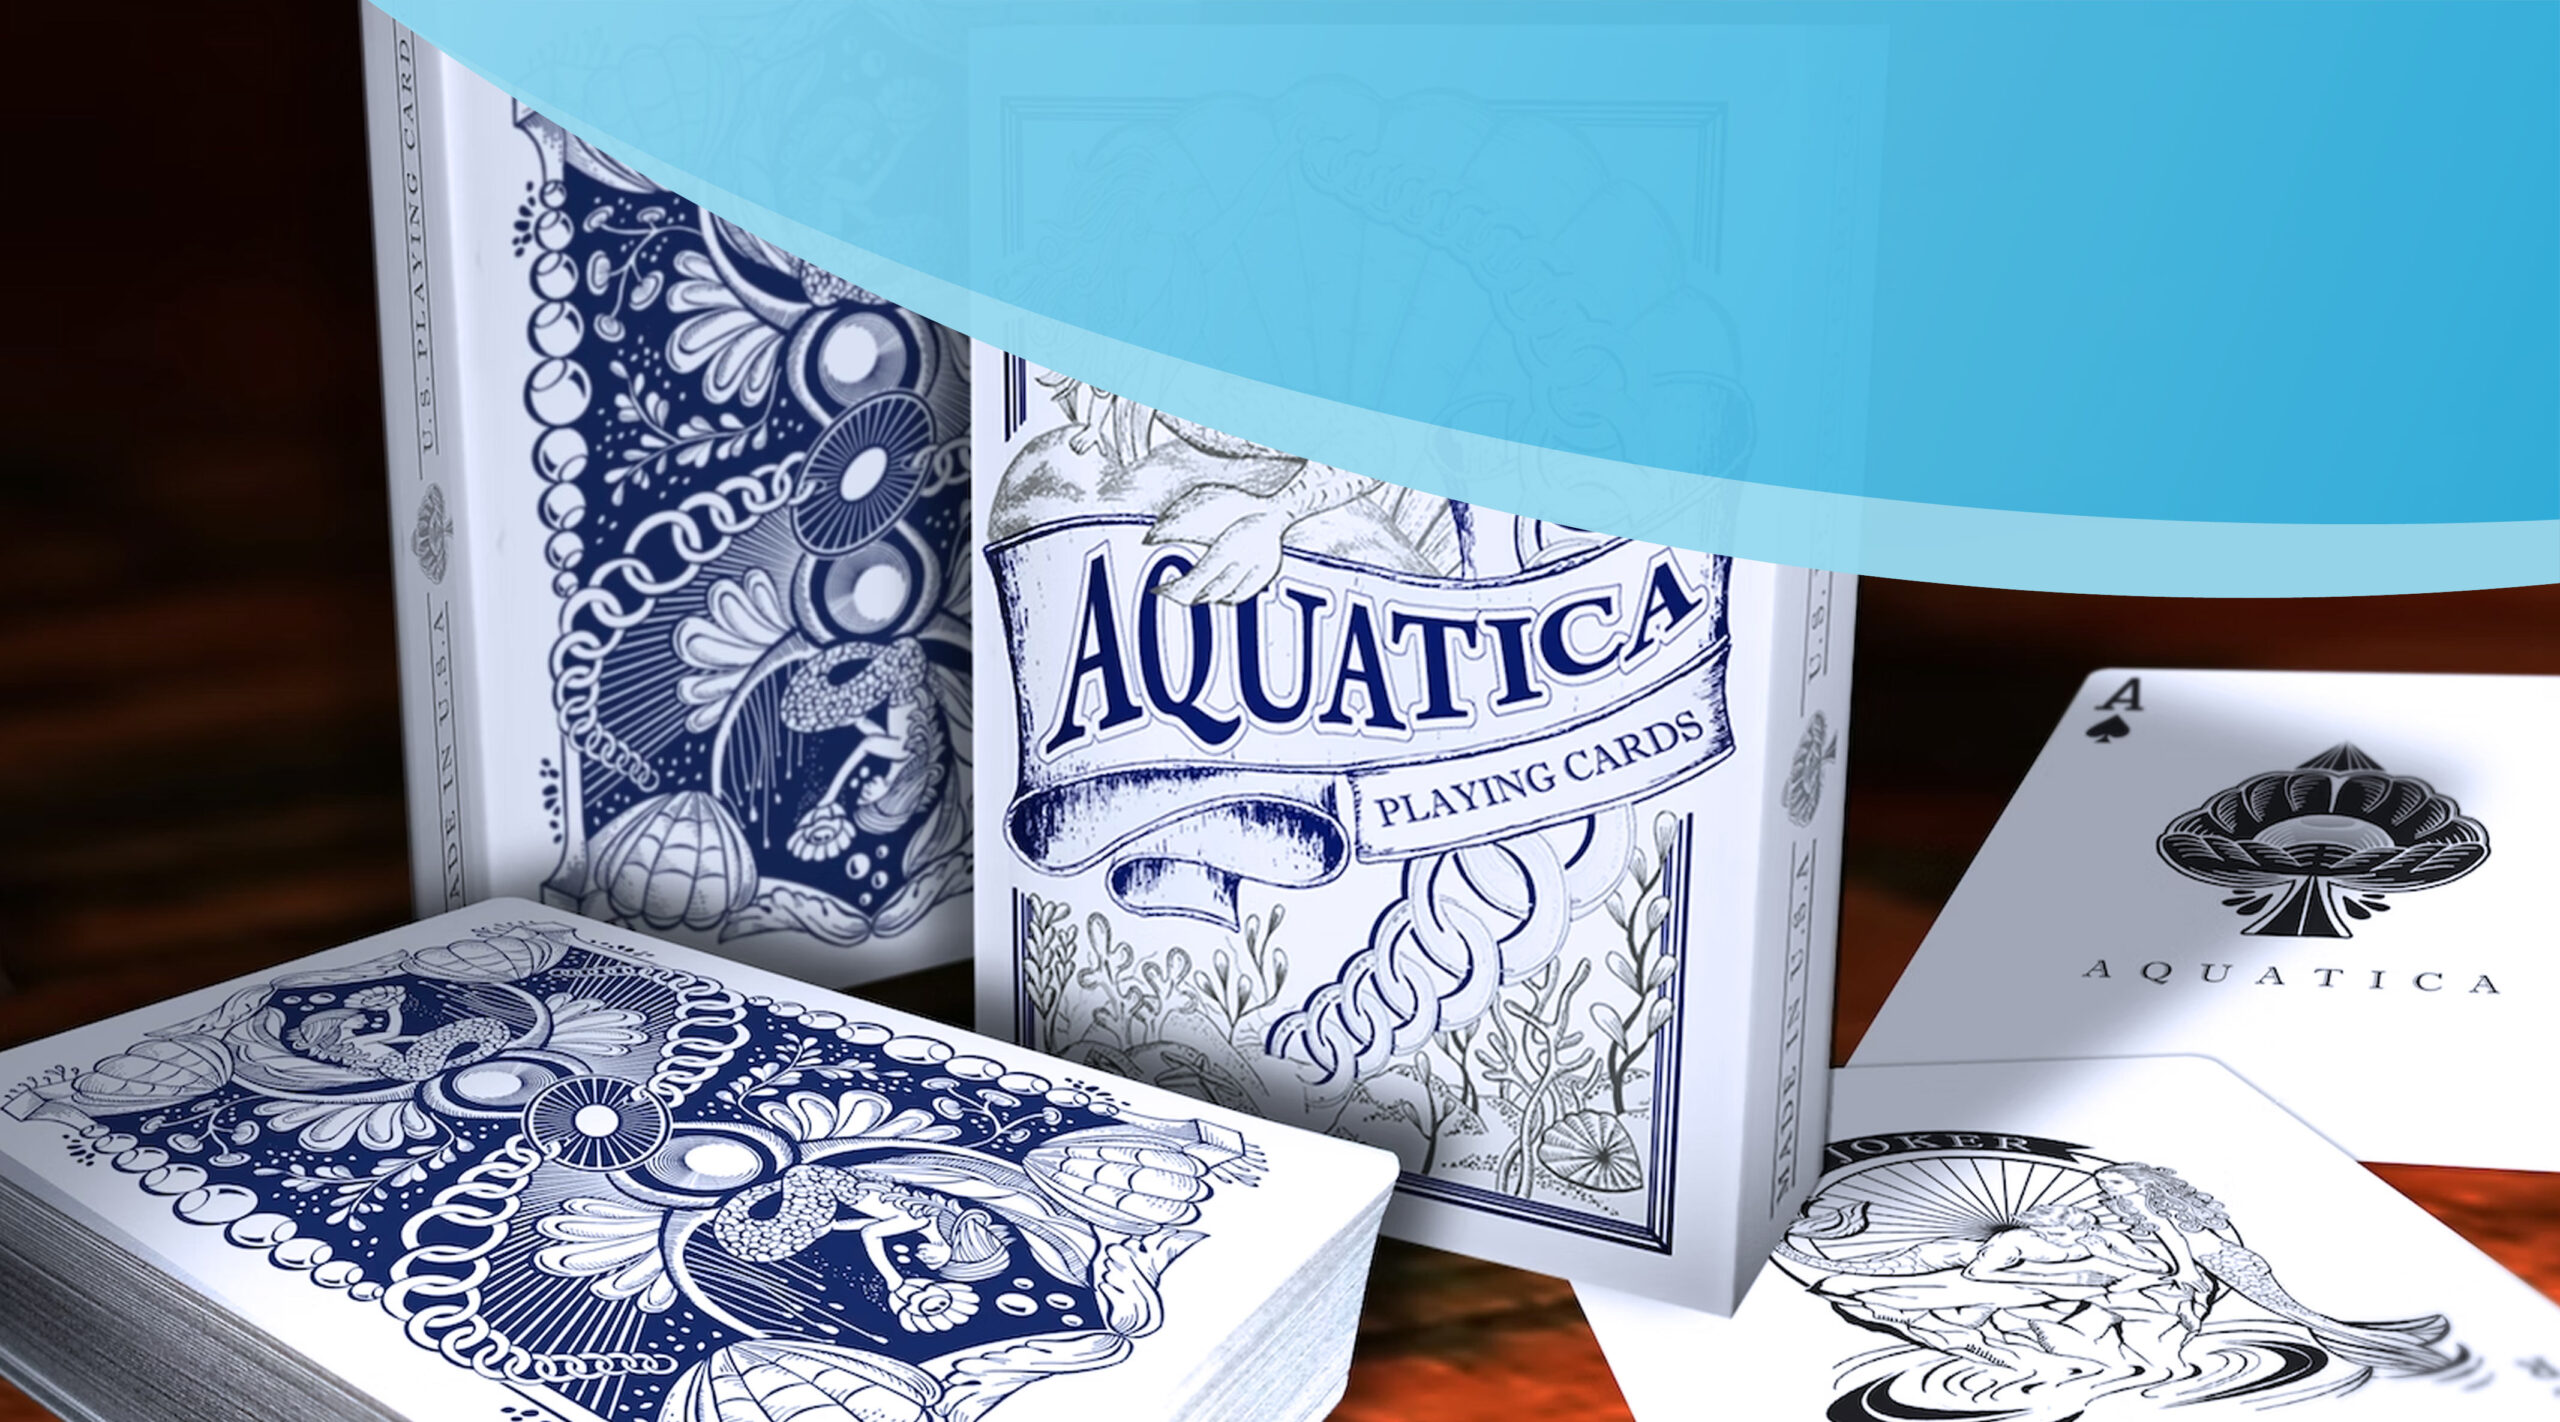 Aquatica Playing Cards Prototyping With US! Prinitng Playing Cards For Magicians Stockport Printers Manchester UK Magic Playing cards